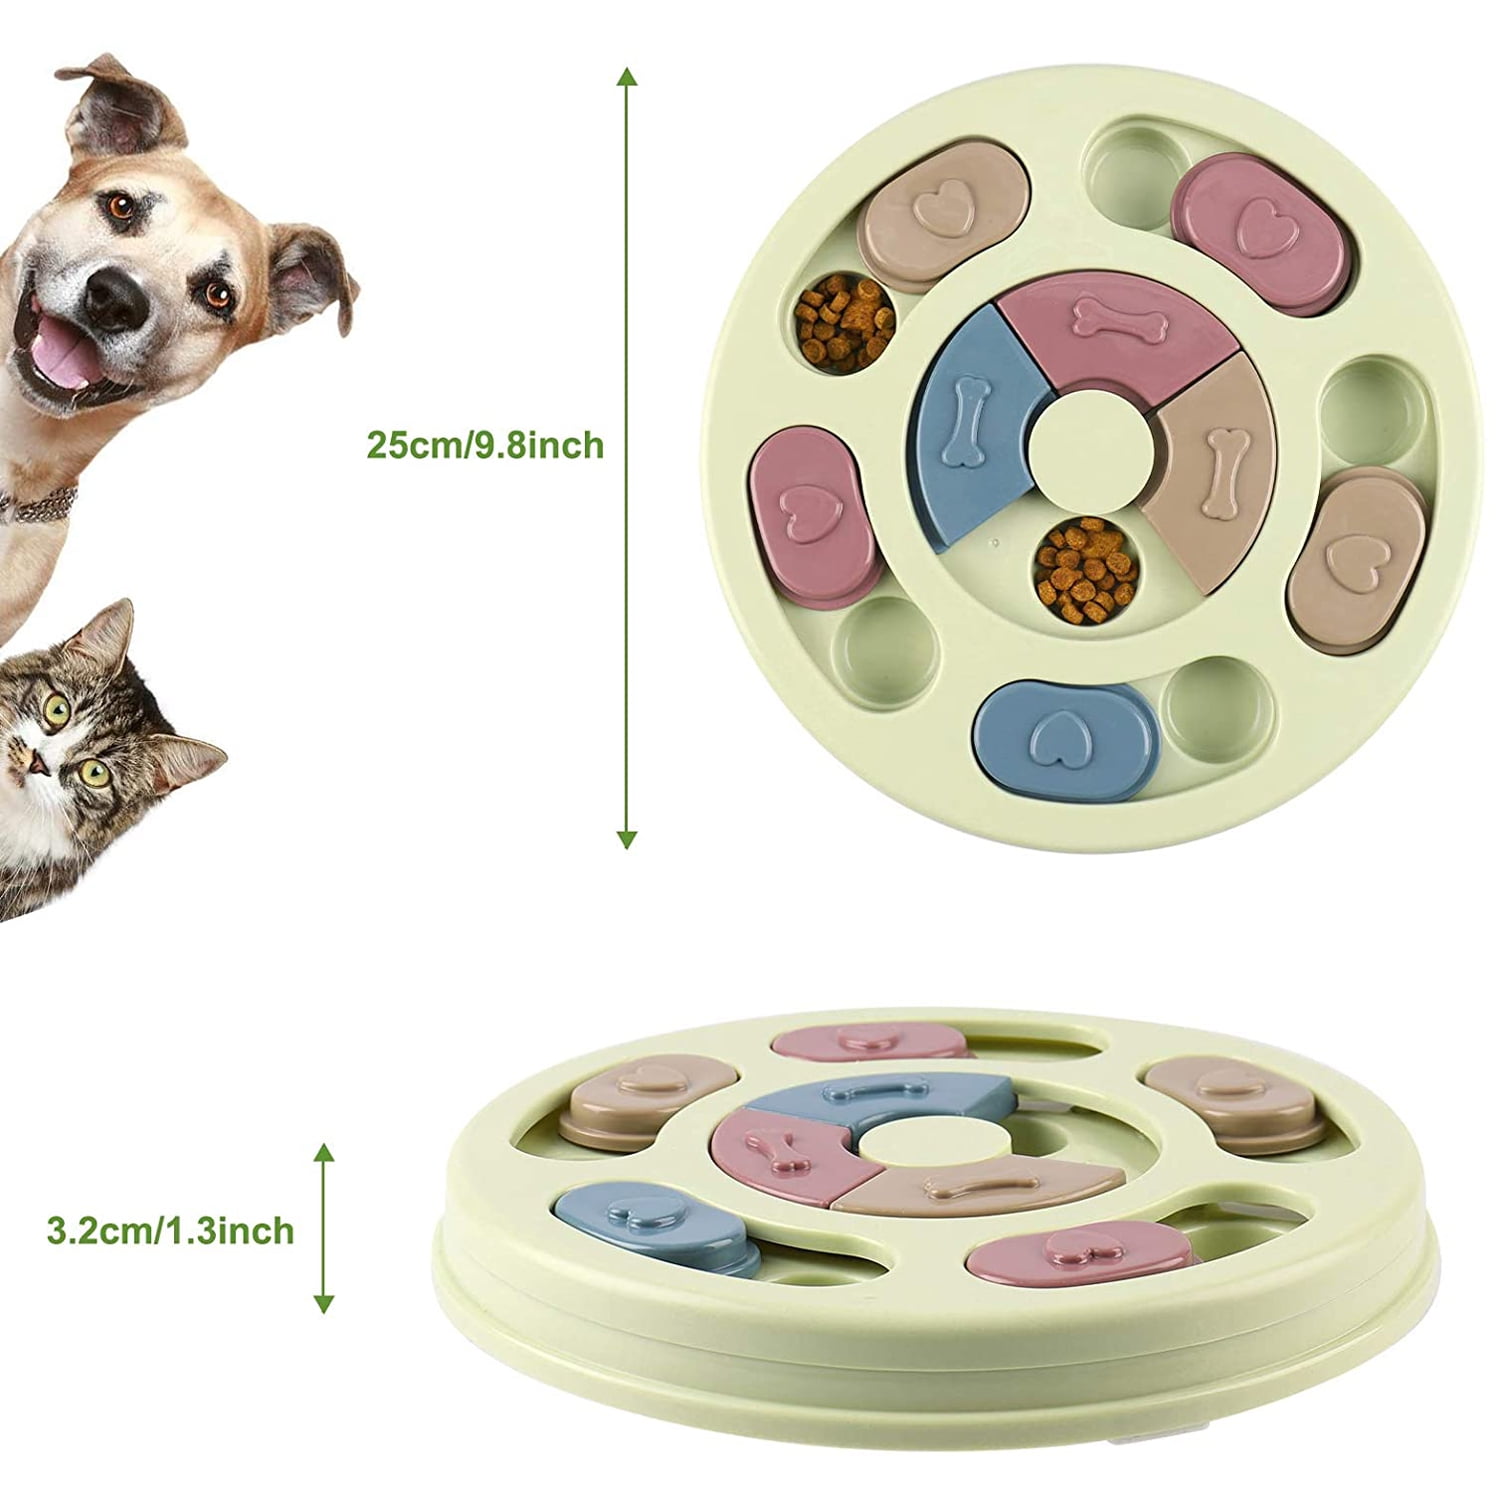 AOBOPLE Dog Puzzle Toy,Dog Food Puzzle Feeder Toys for IQ Training